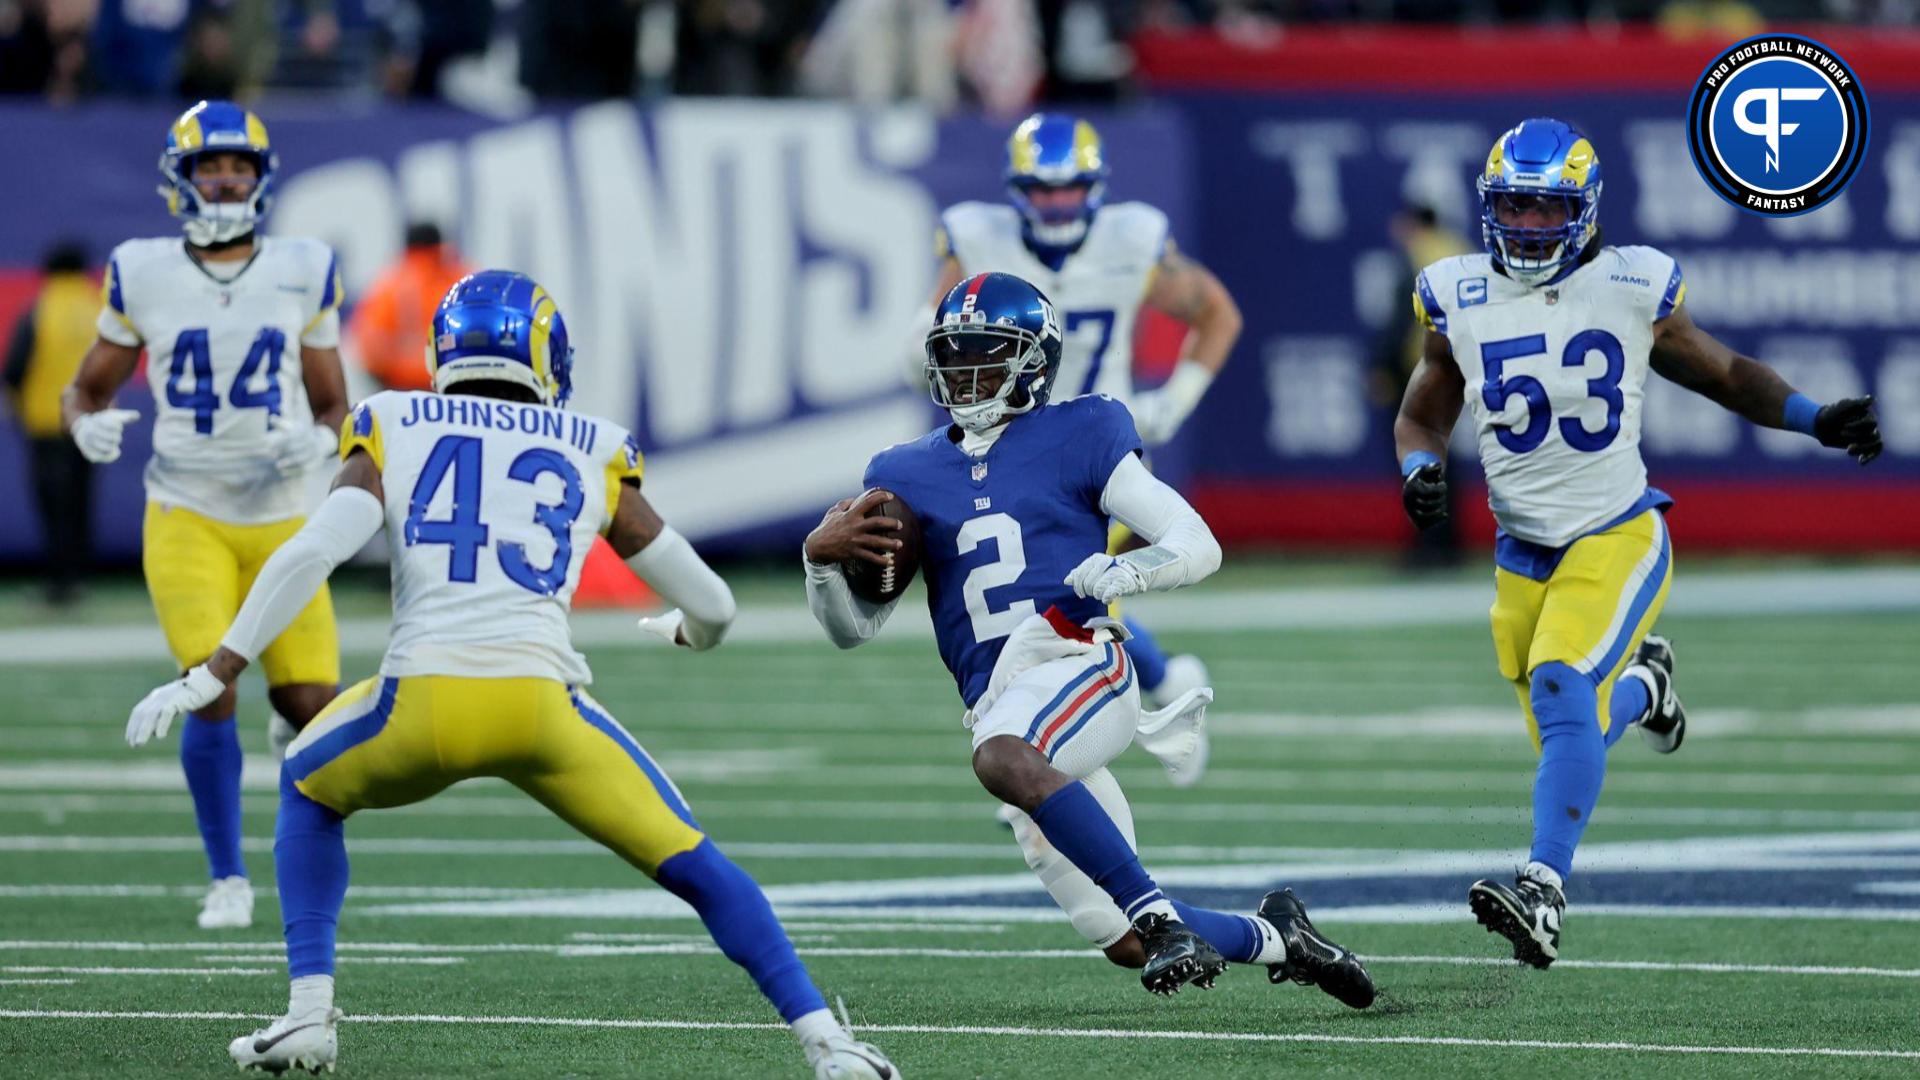 New York Giants quarterback Tyrod Taylor (2) runs with the ball against Los Angeles Rams safety John Johnson III (43) and cornerback Ahkello Witherspoon (44) and linebacker Ernest Jones (53) during the fourth quarter at MetLife Stadium.